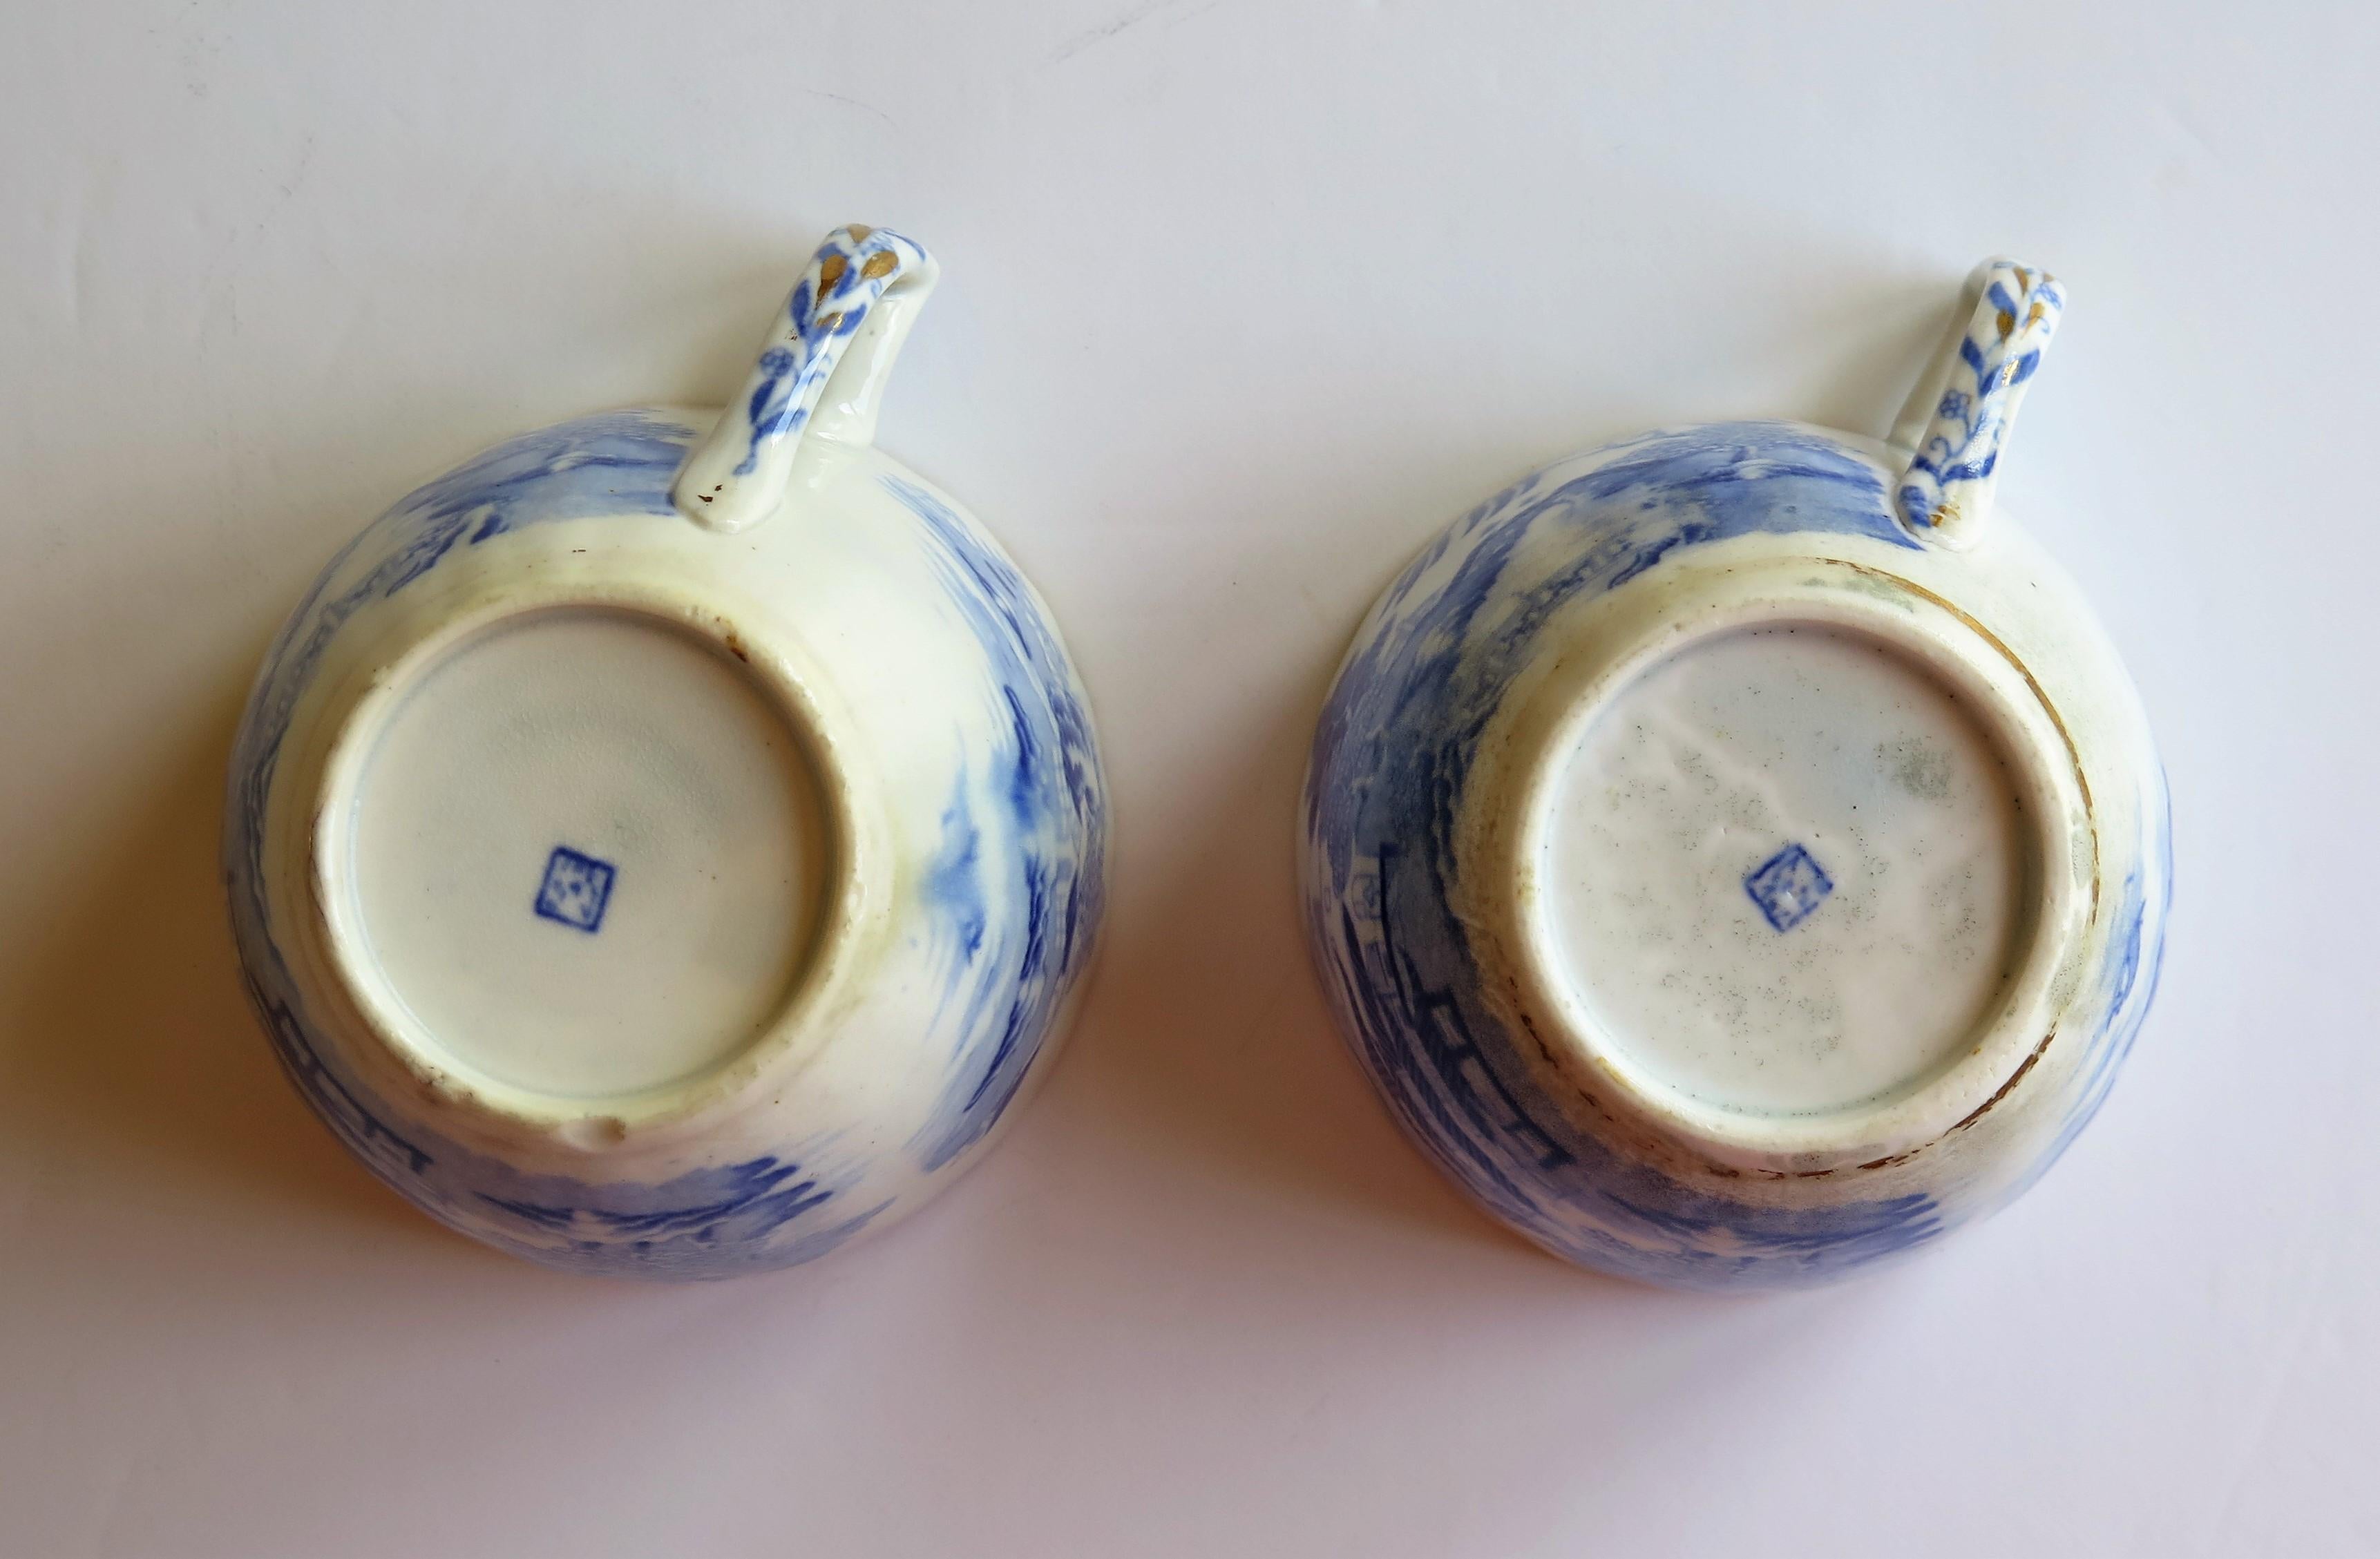 Miles Mason Porcelain Pair of Tea Cups Broseley Blue and White Pattern, Ca. 1805 For Sale 9